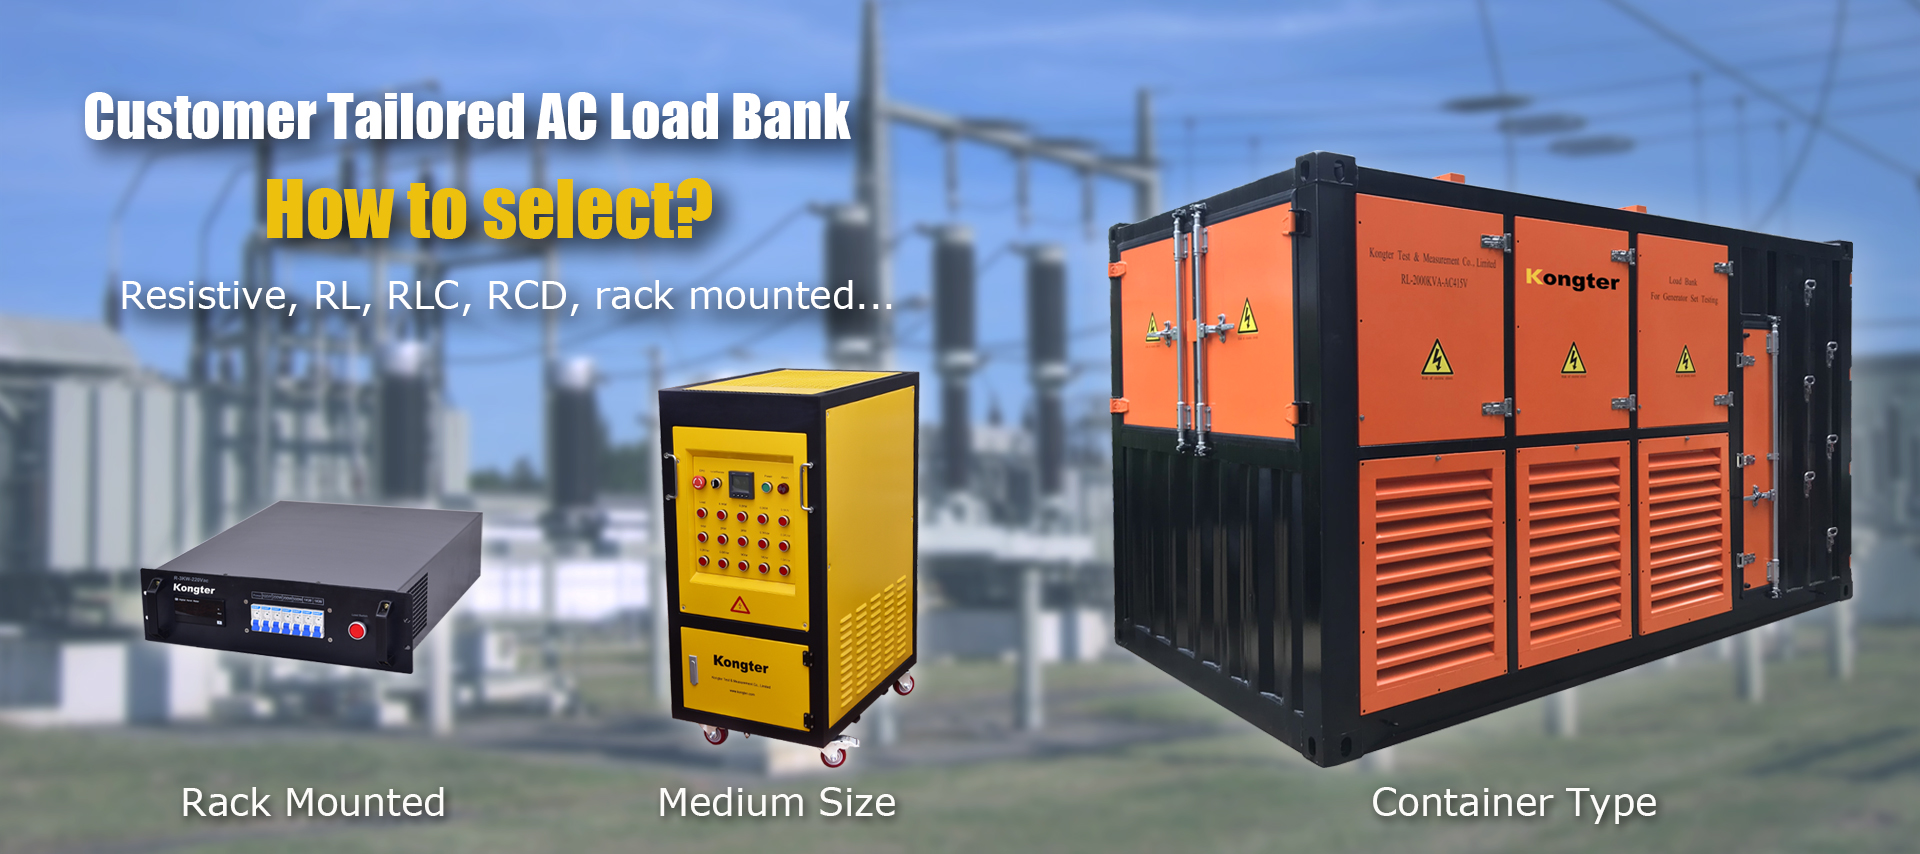 Kongter offers a wide range of customer-tailored AC load banks that excel in a range of load test applications and environments